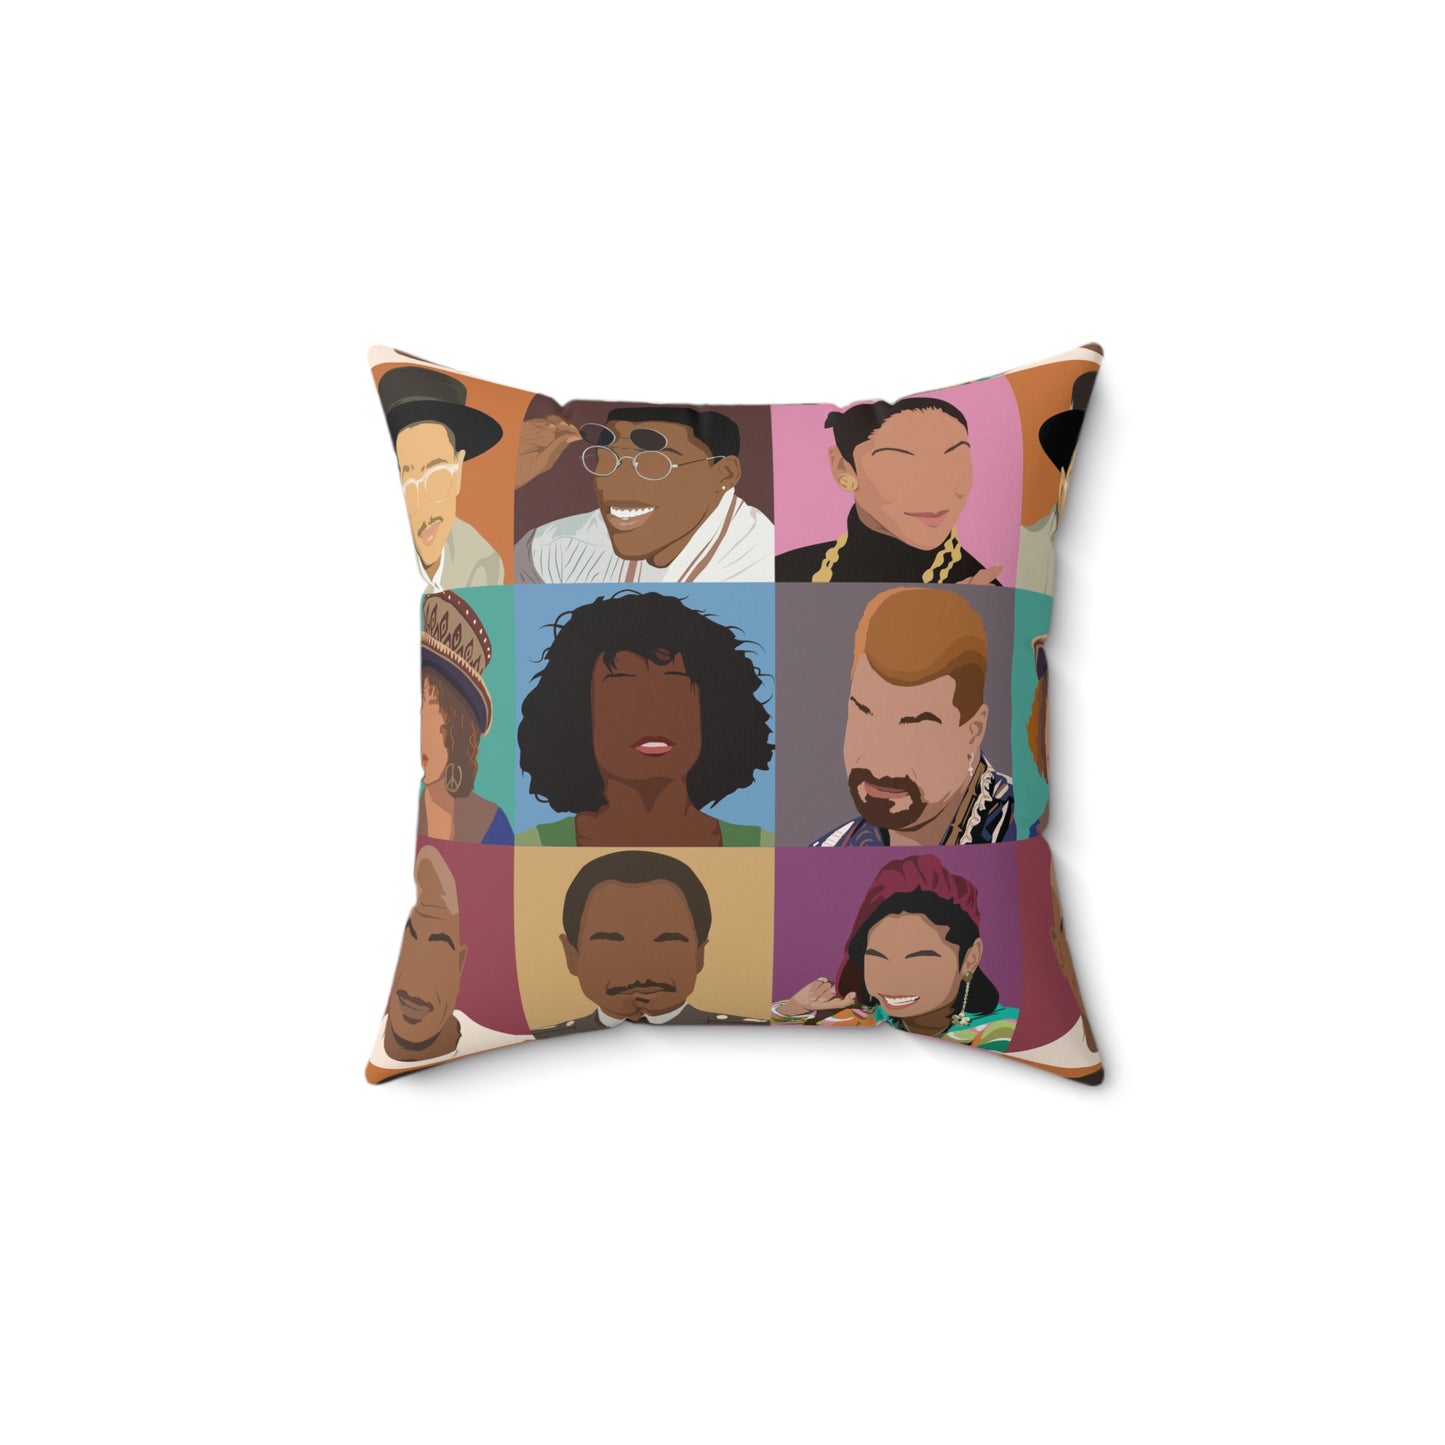 A Different World Square Pillow